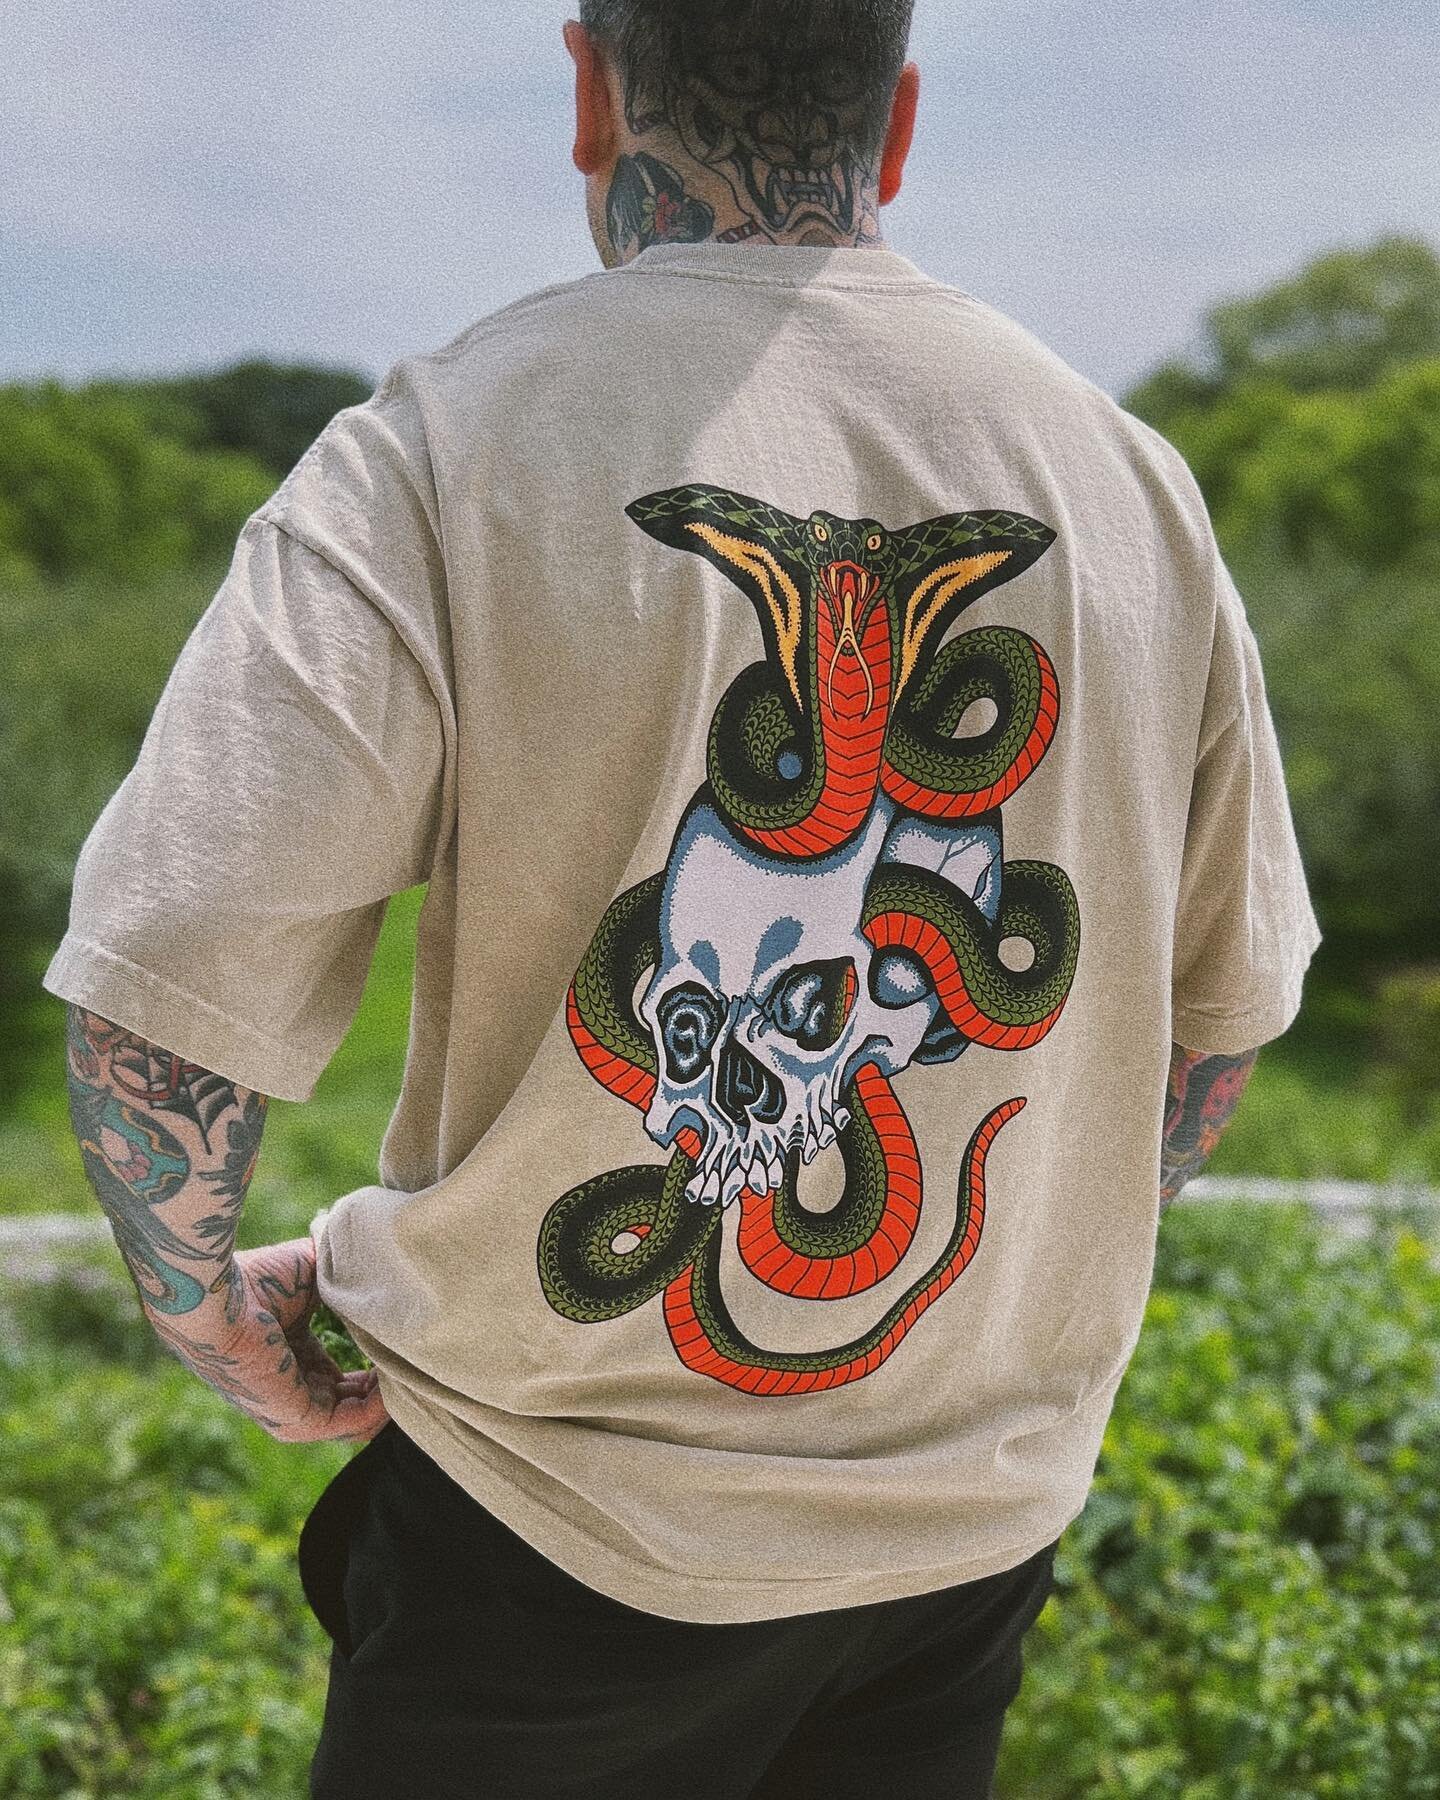 As part of tomorrow&rsquo;s Spring/Summer collection we will be bringing back the Cobra &amp; Skull shirts! Available in two colourways - don&rsquo;t miss it 💪🏼✨